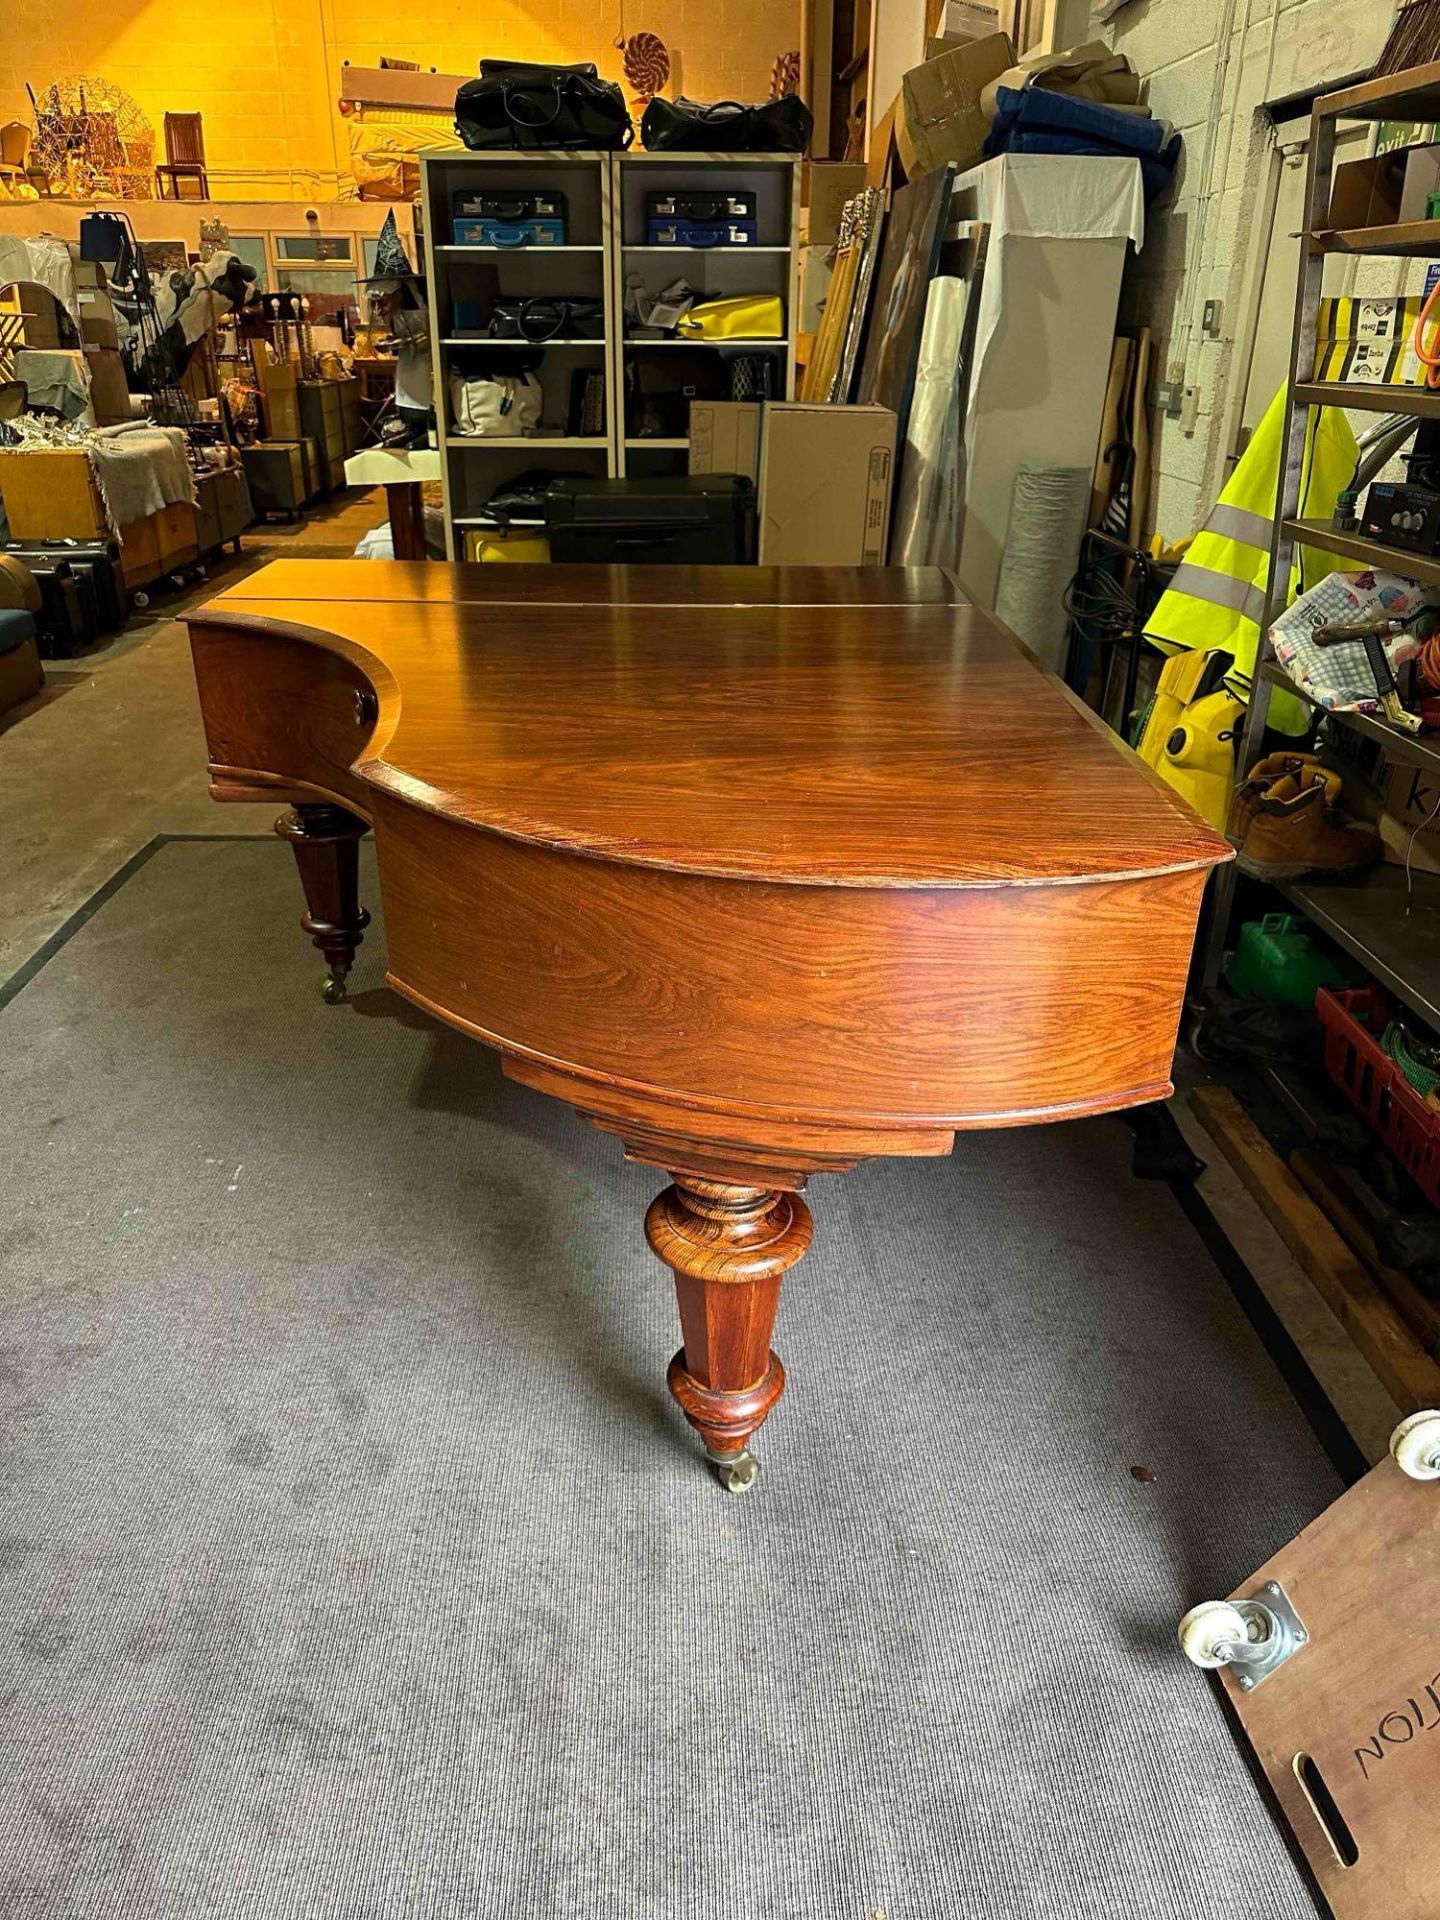 C Bechstein Berlin Model V Rosewood Case 6ft 7 Grand Piano Manufactured In 1894 (Serial 37578) The - Image 8 of 8